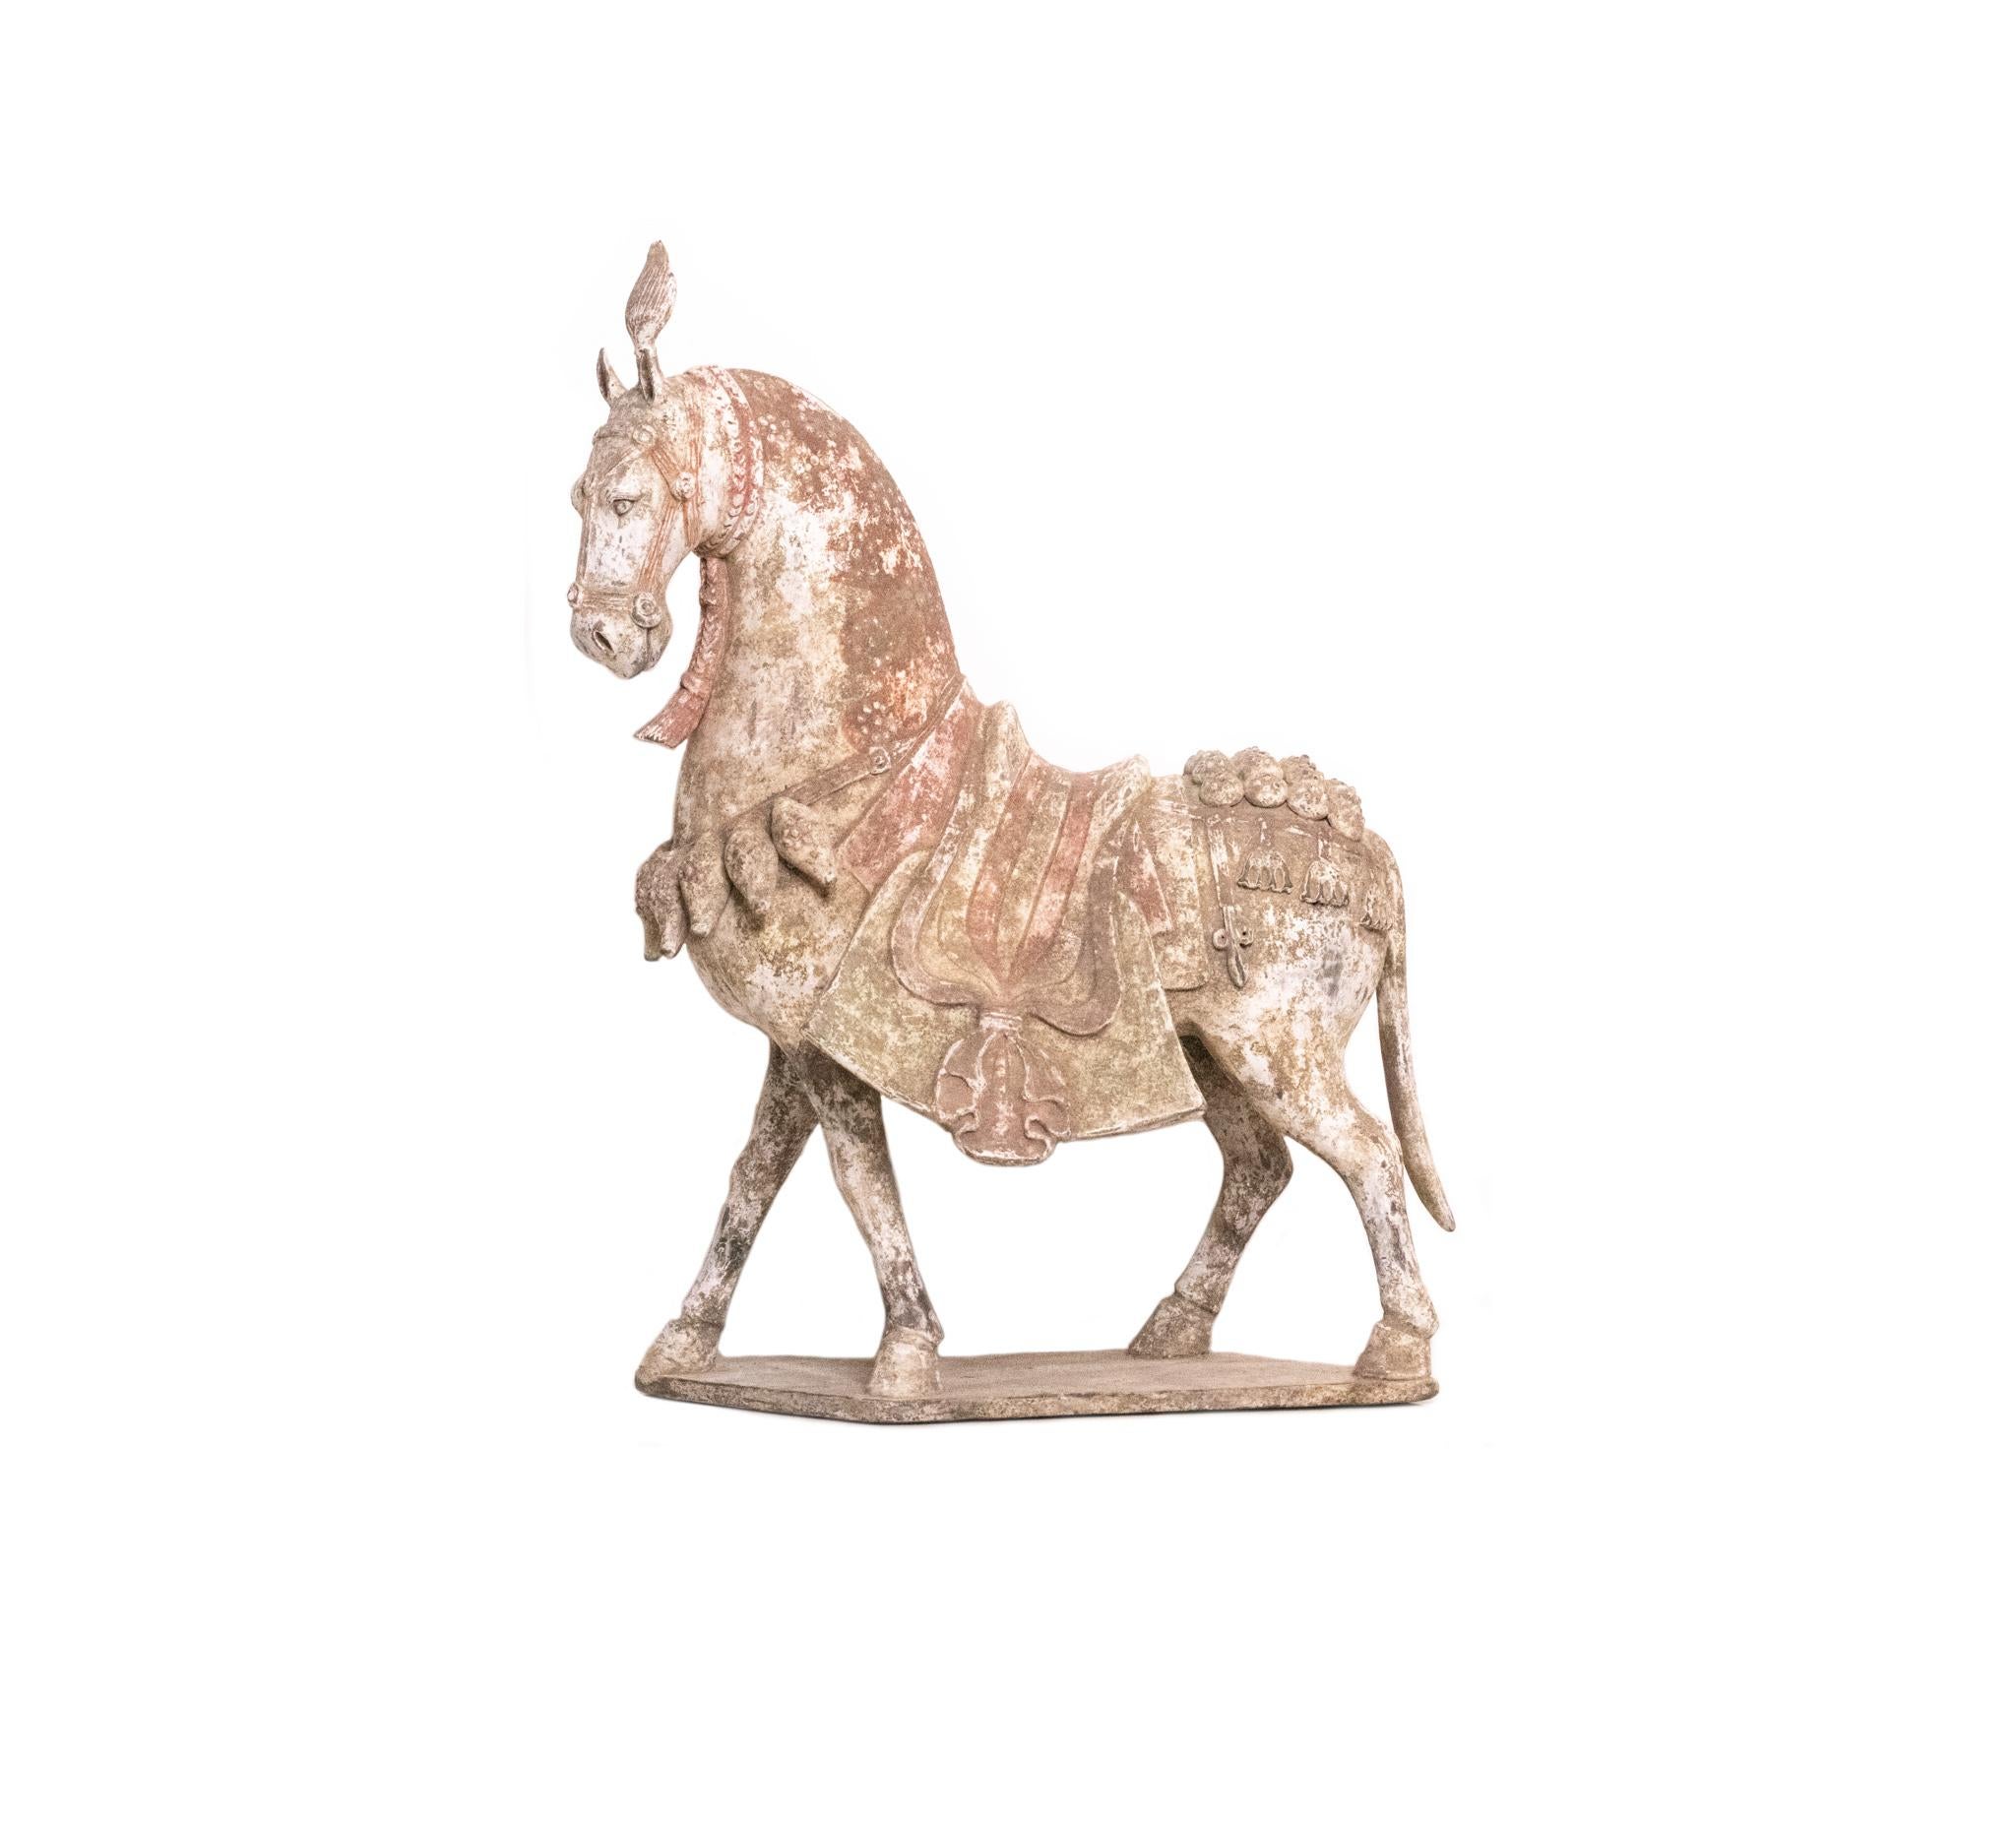 Extremely rare Chinese pottery caparisoned horse from the Northern Qi region.

A beautiful large sculptural piece, created in China during the Northern Qi dynasty period, between the 549 and 577 AD. This horse statue is extremely finely modeled of